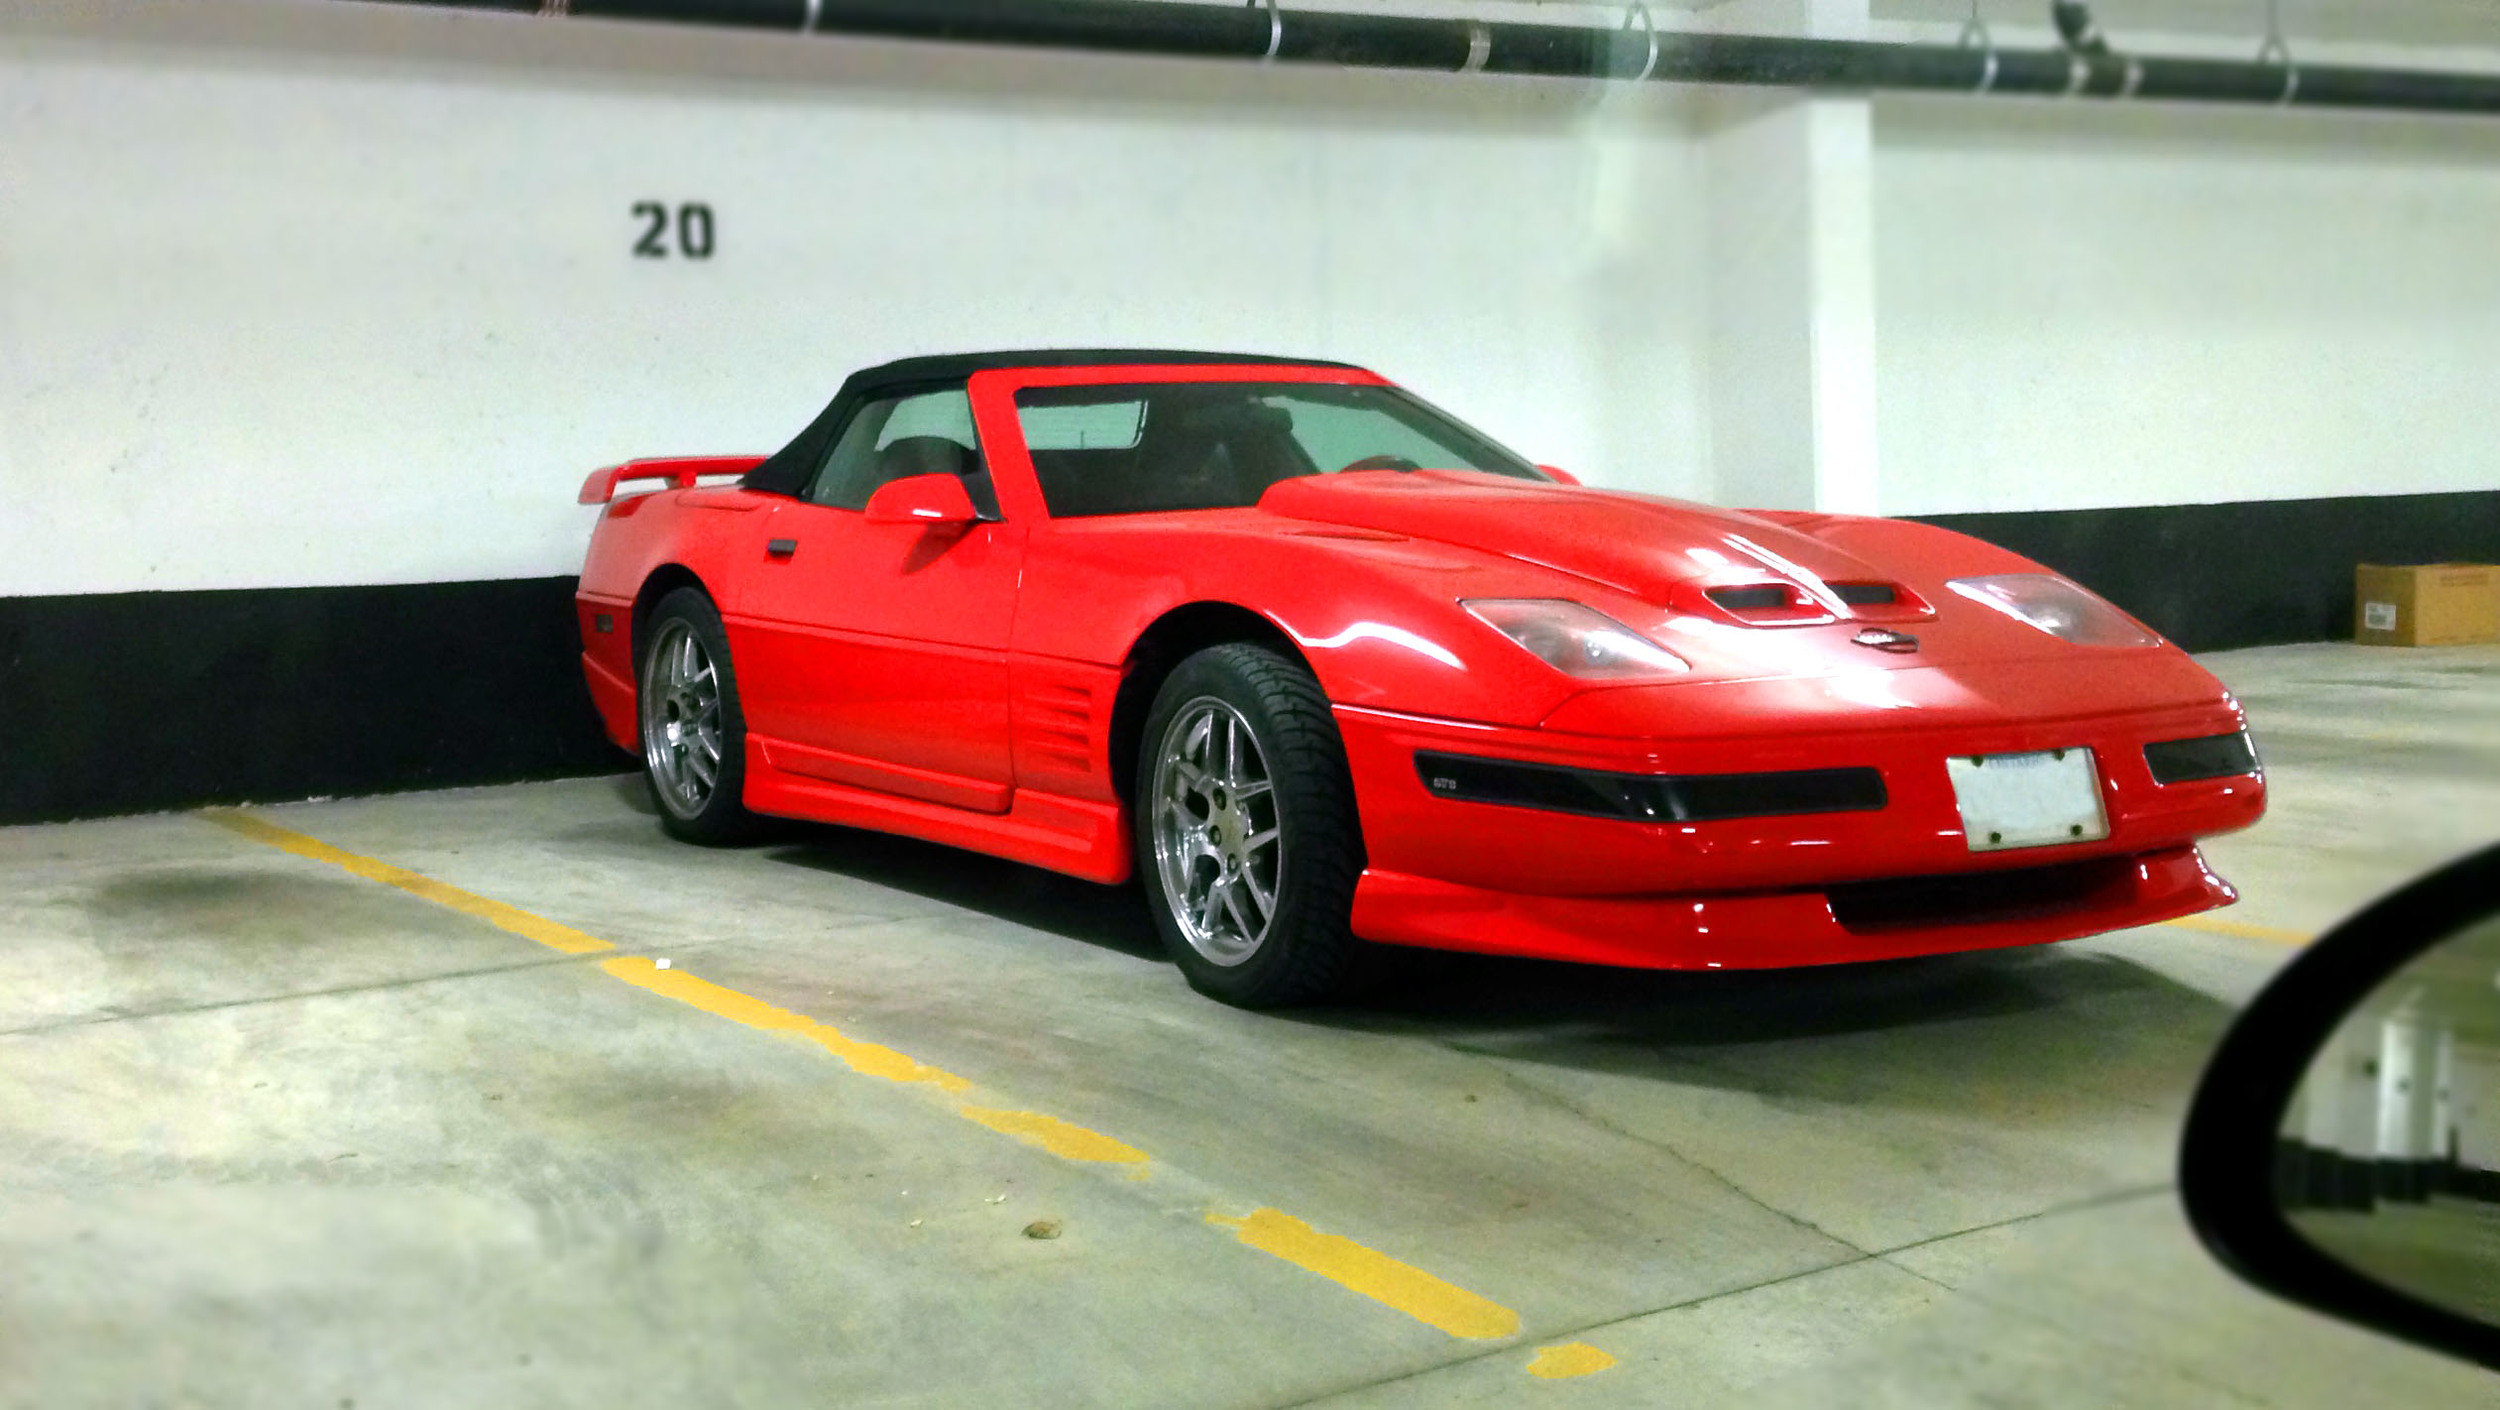 A very highly "customized" C4 Corvette.